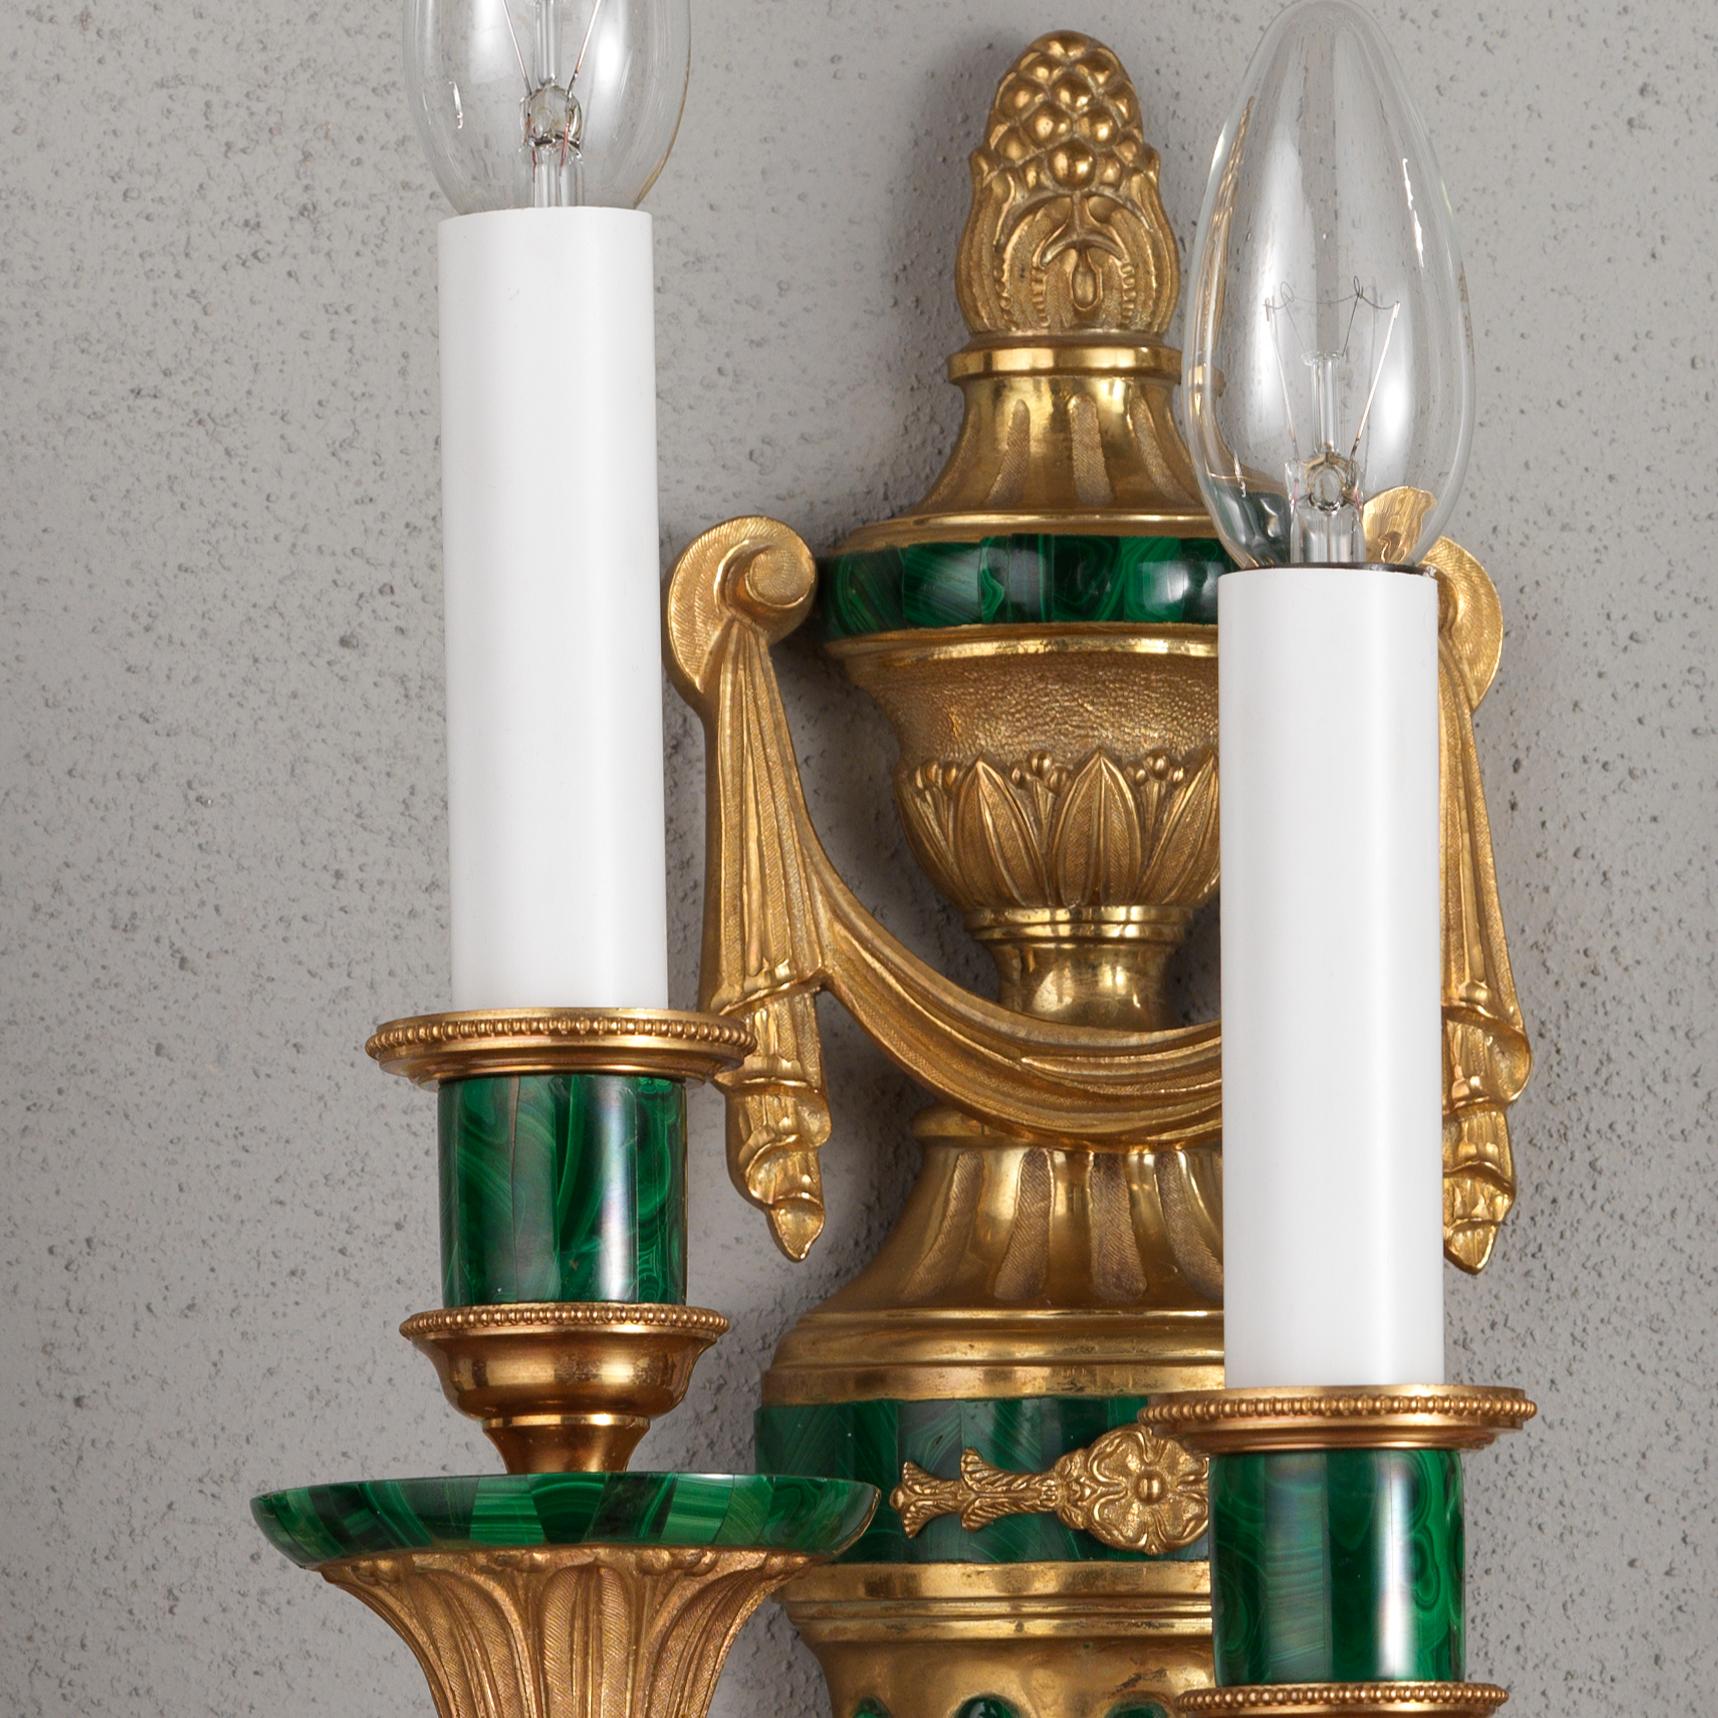 This Louis XVI style gilt bronze and malachite veneer wall sconce by Gherardo Degli Albizzishows many high quality hand chiselled details, enriched by Malachite veneer. At the top there is an urn with a pine finial and a drapery decoration.
Below